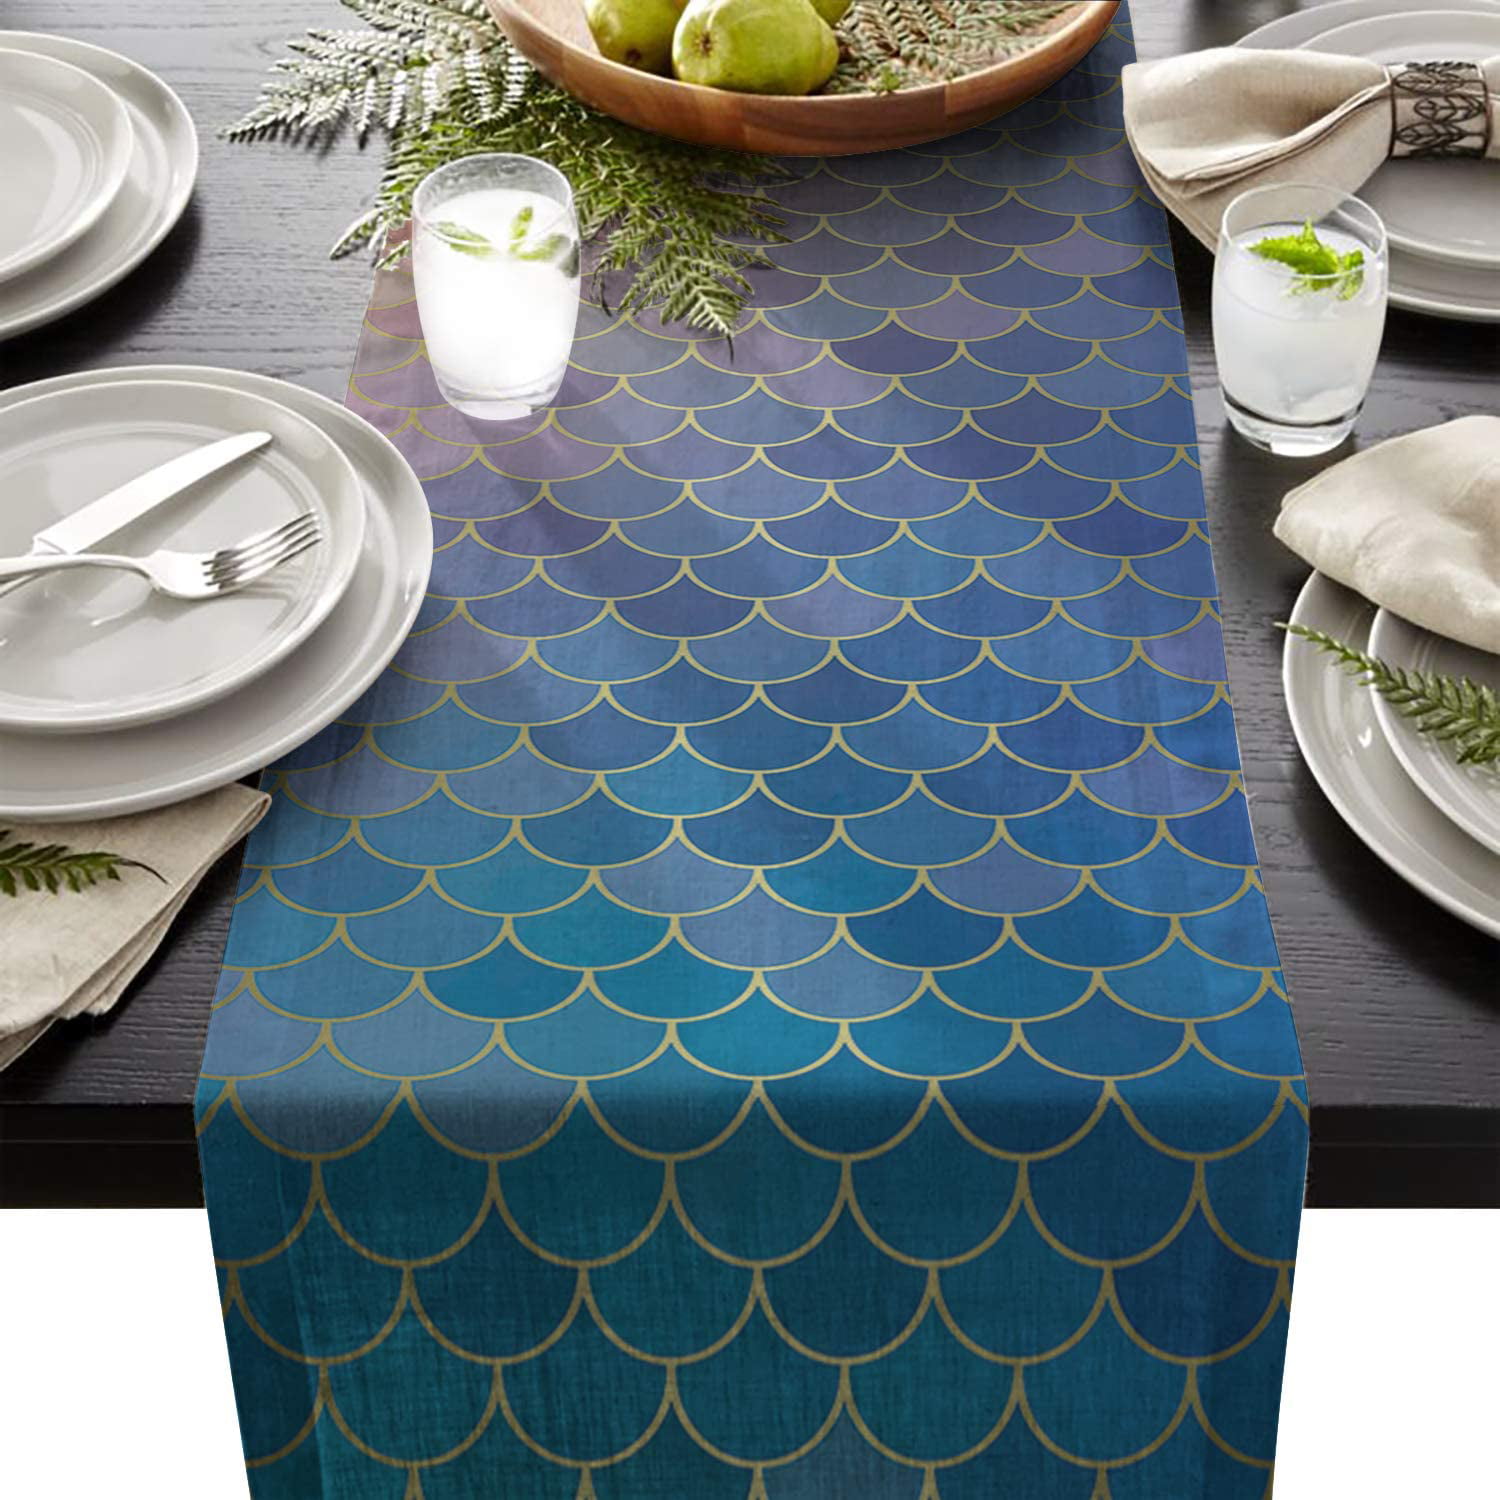 Table Runner Sets with 6 Placemats Diamond Check Turquoise Teal Green Non-Slip Table Runner Place Mats Watercolor Table Mats Runner Set for Dining Table Party Wedding 13 x 70 inches long